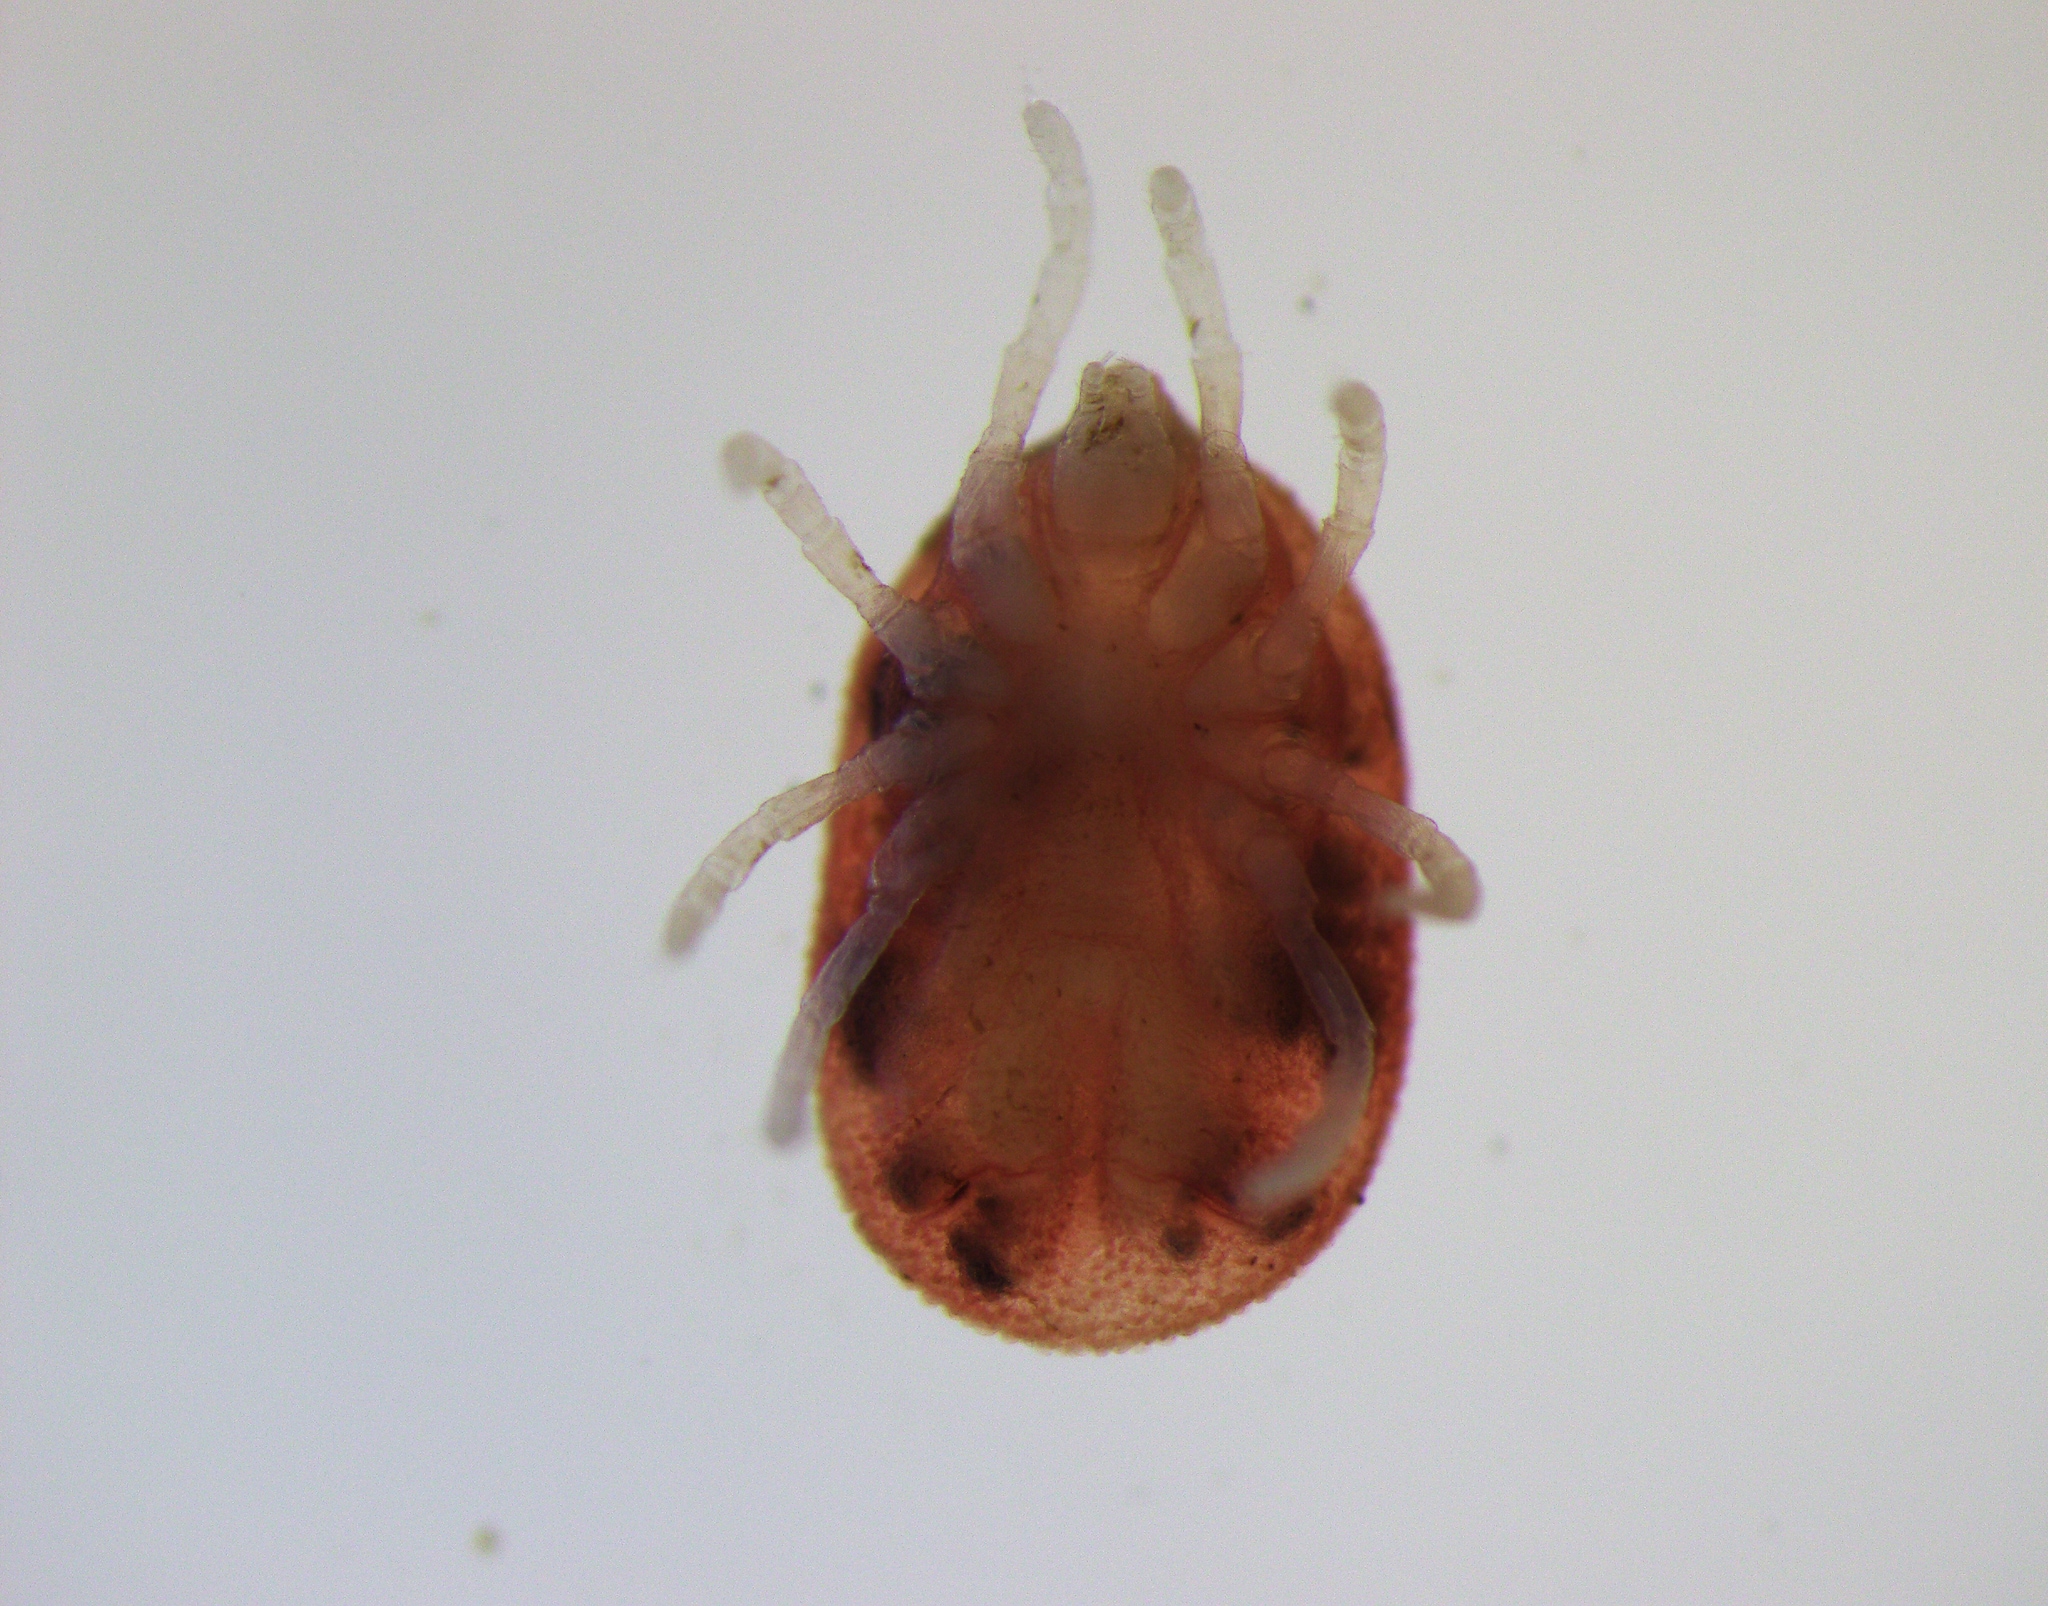 Photo of a soft tick, Ornithodoros hermsi, from the bottom.